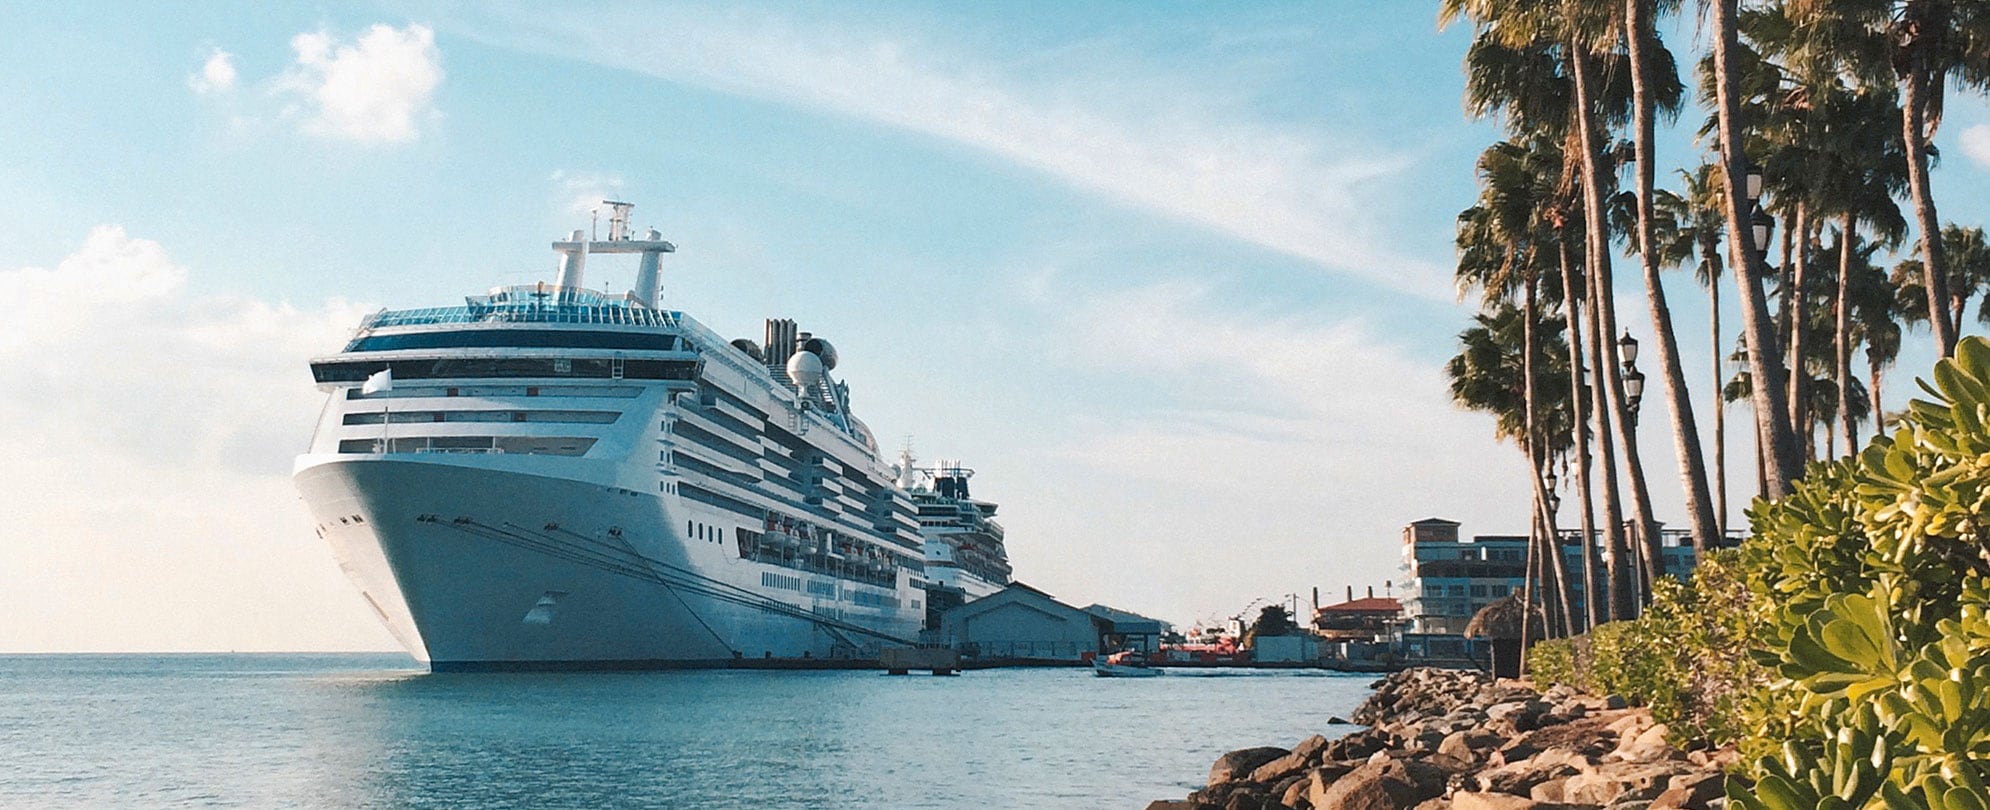 A cruise ship is docked at a Caribbean port with a stony shore and palm trees